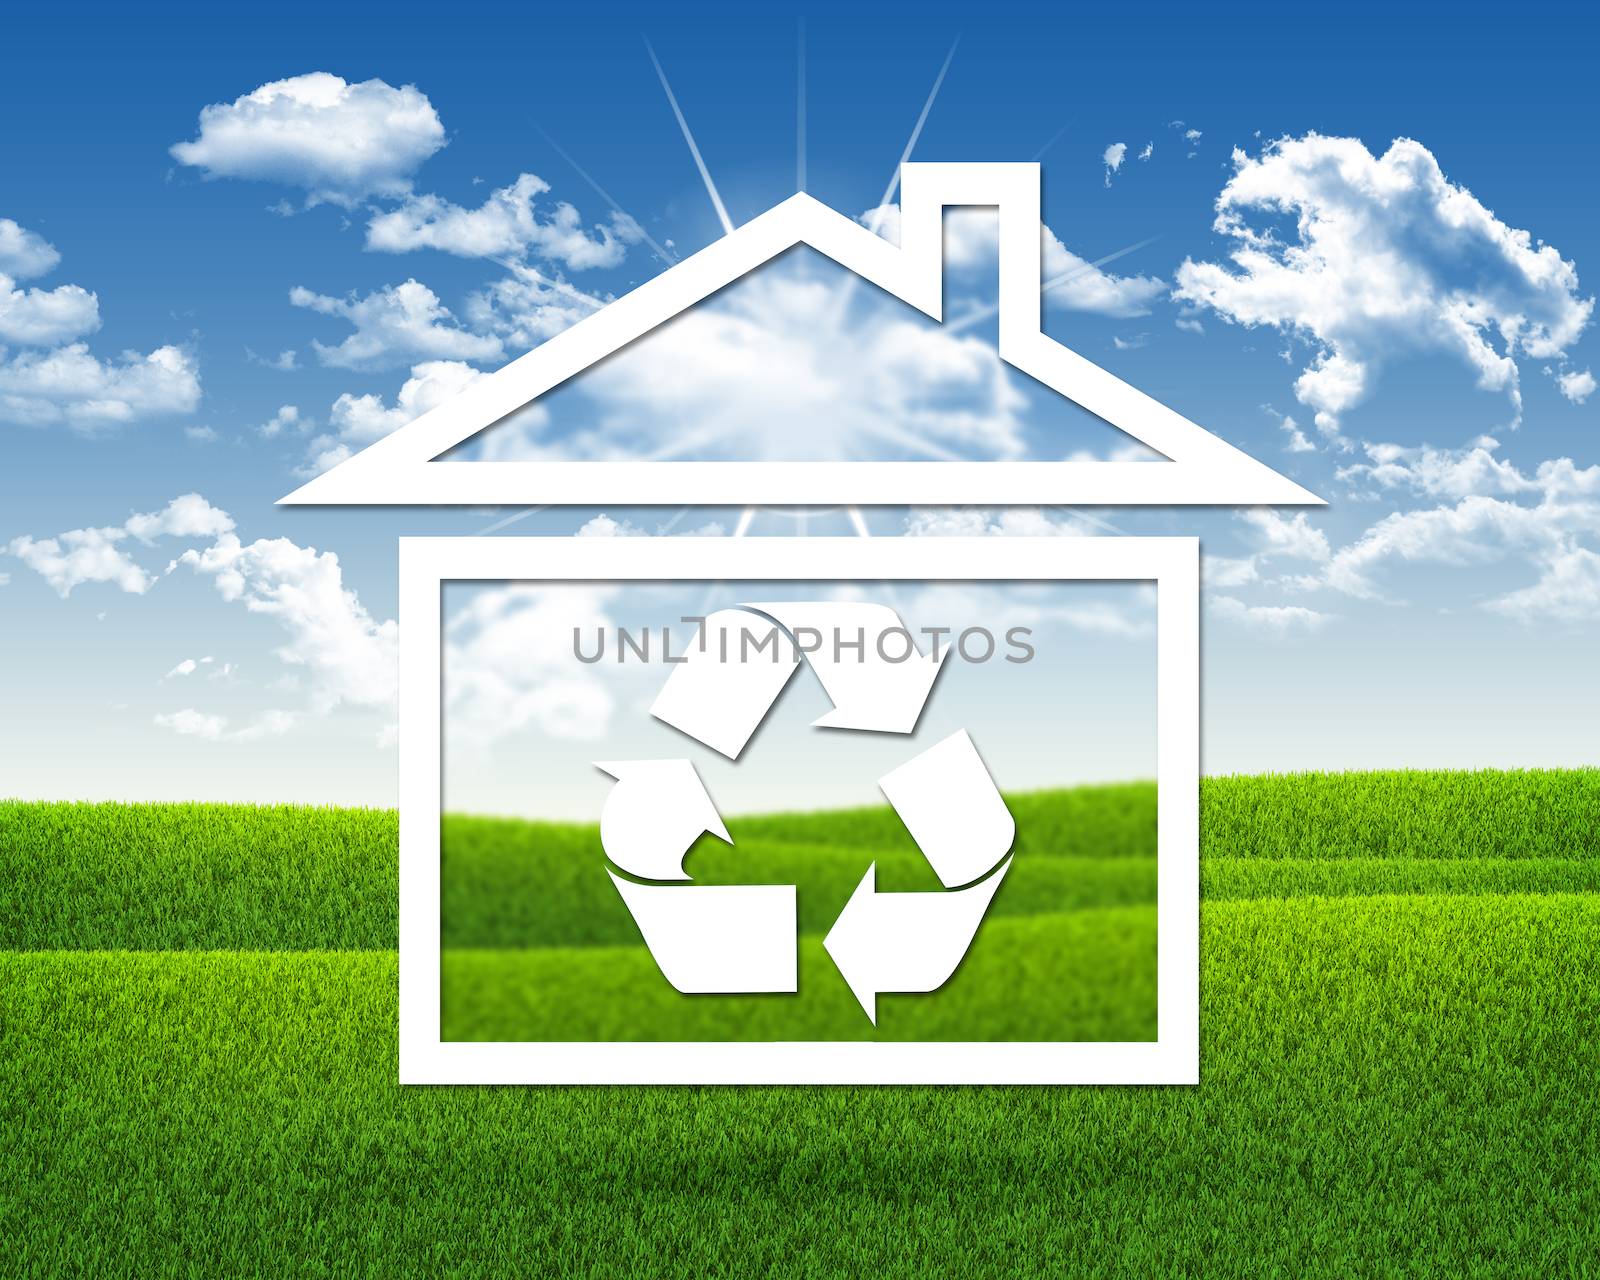 House icon with symbol recycling. Green grass and blue sky as backdrop